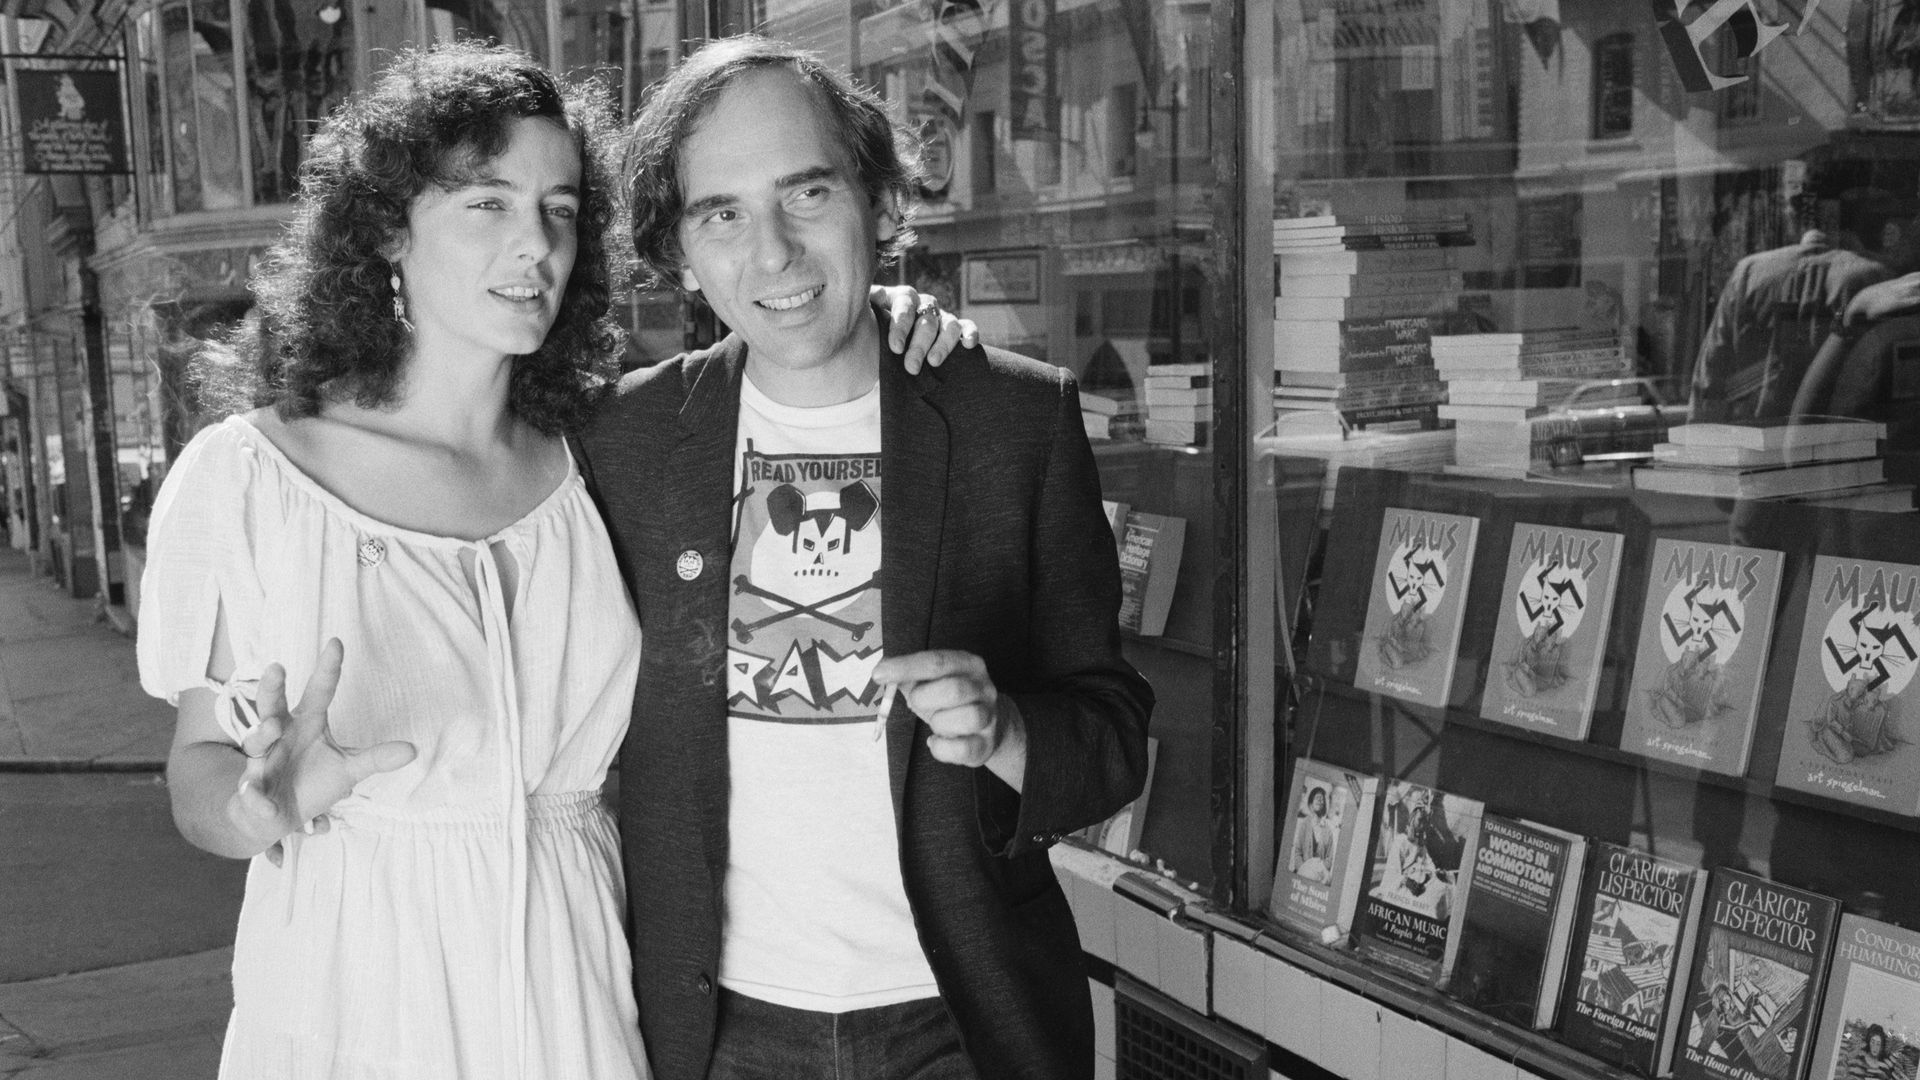 Art Spiegelman and Françoise Mouly, his wife, posing with a display of "Maus" in a book store in San Francisco in 1986.